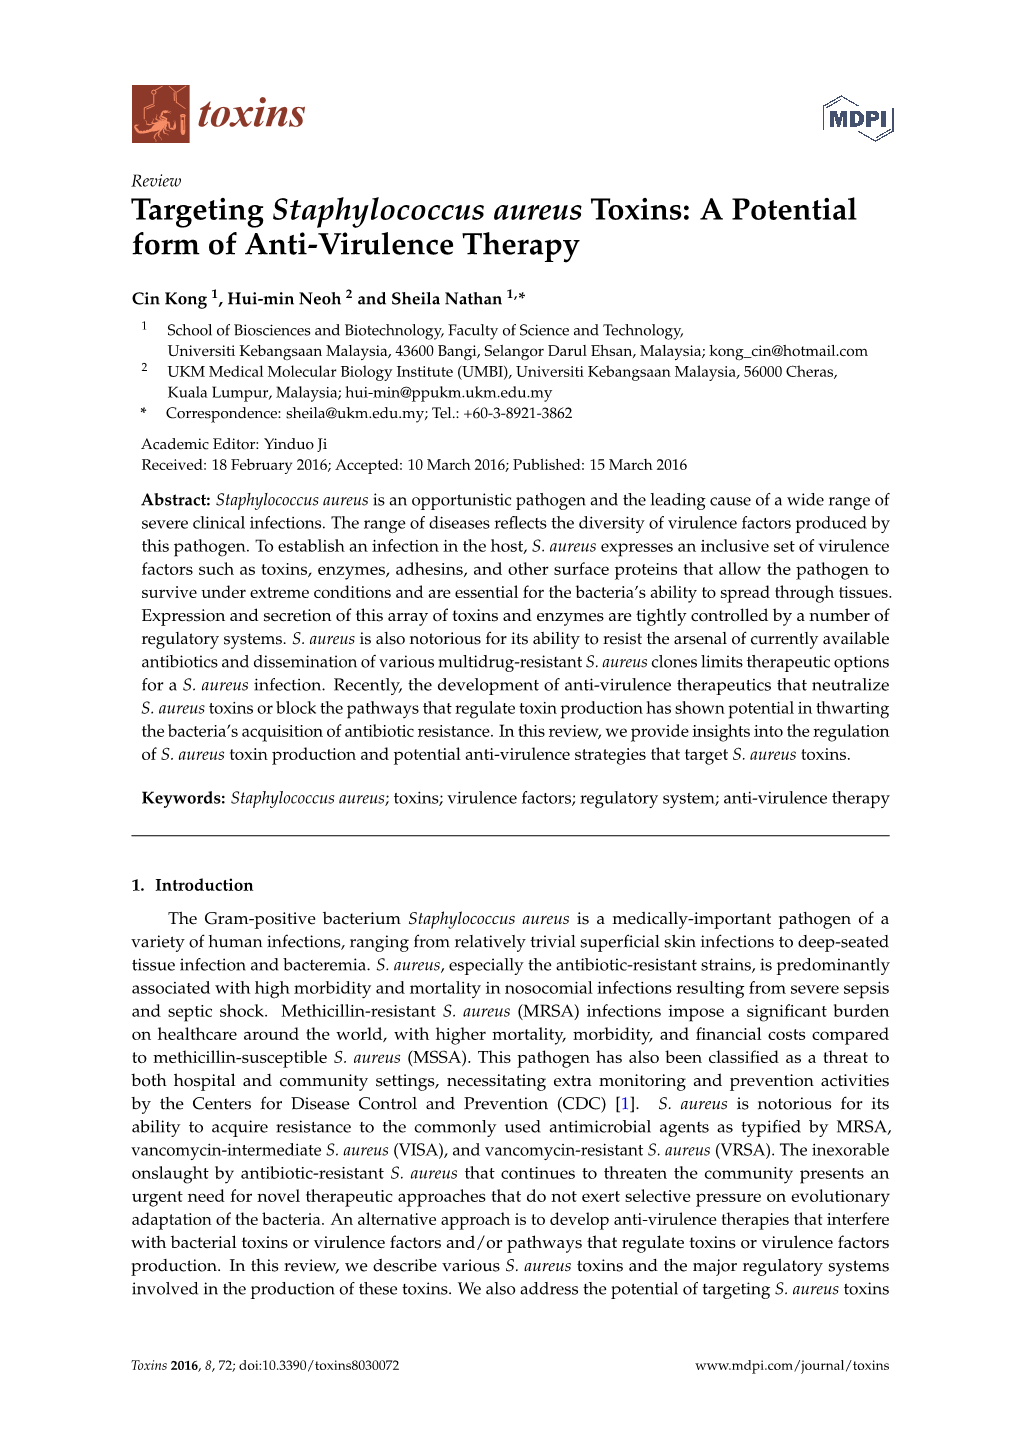 Targeting Staphylococcus Aureus Toxins: a Potential Form of Anti-Virulence Therapy